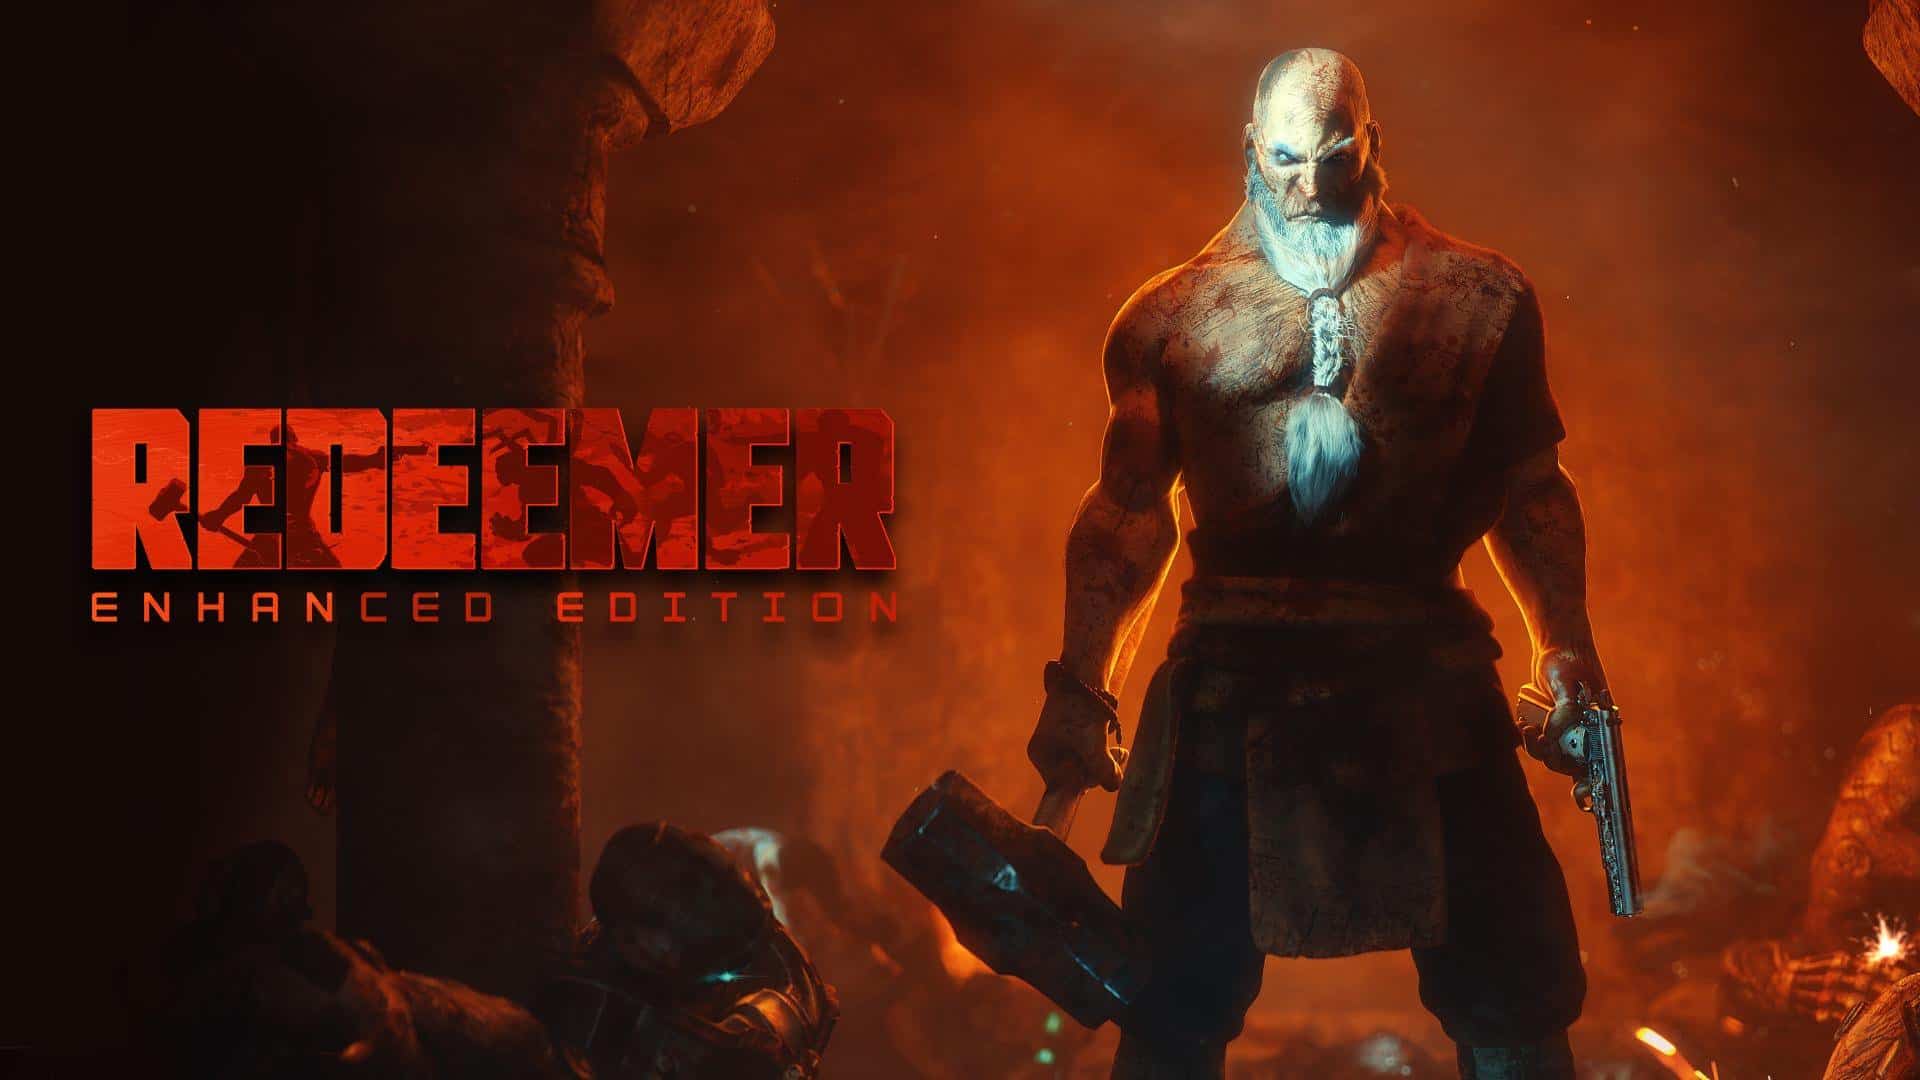 Redeemer: Enhanced Edition Will Be Available On The 12th of July, 2019